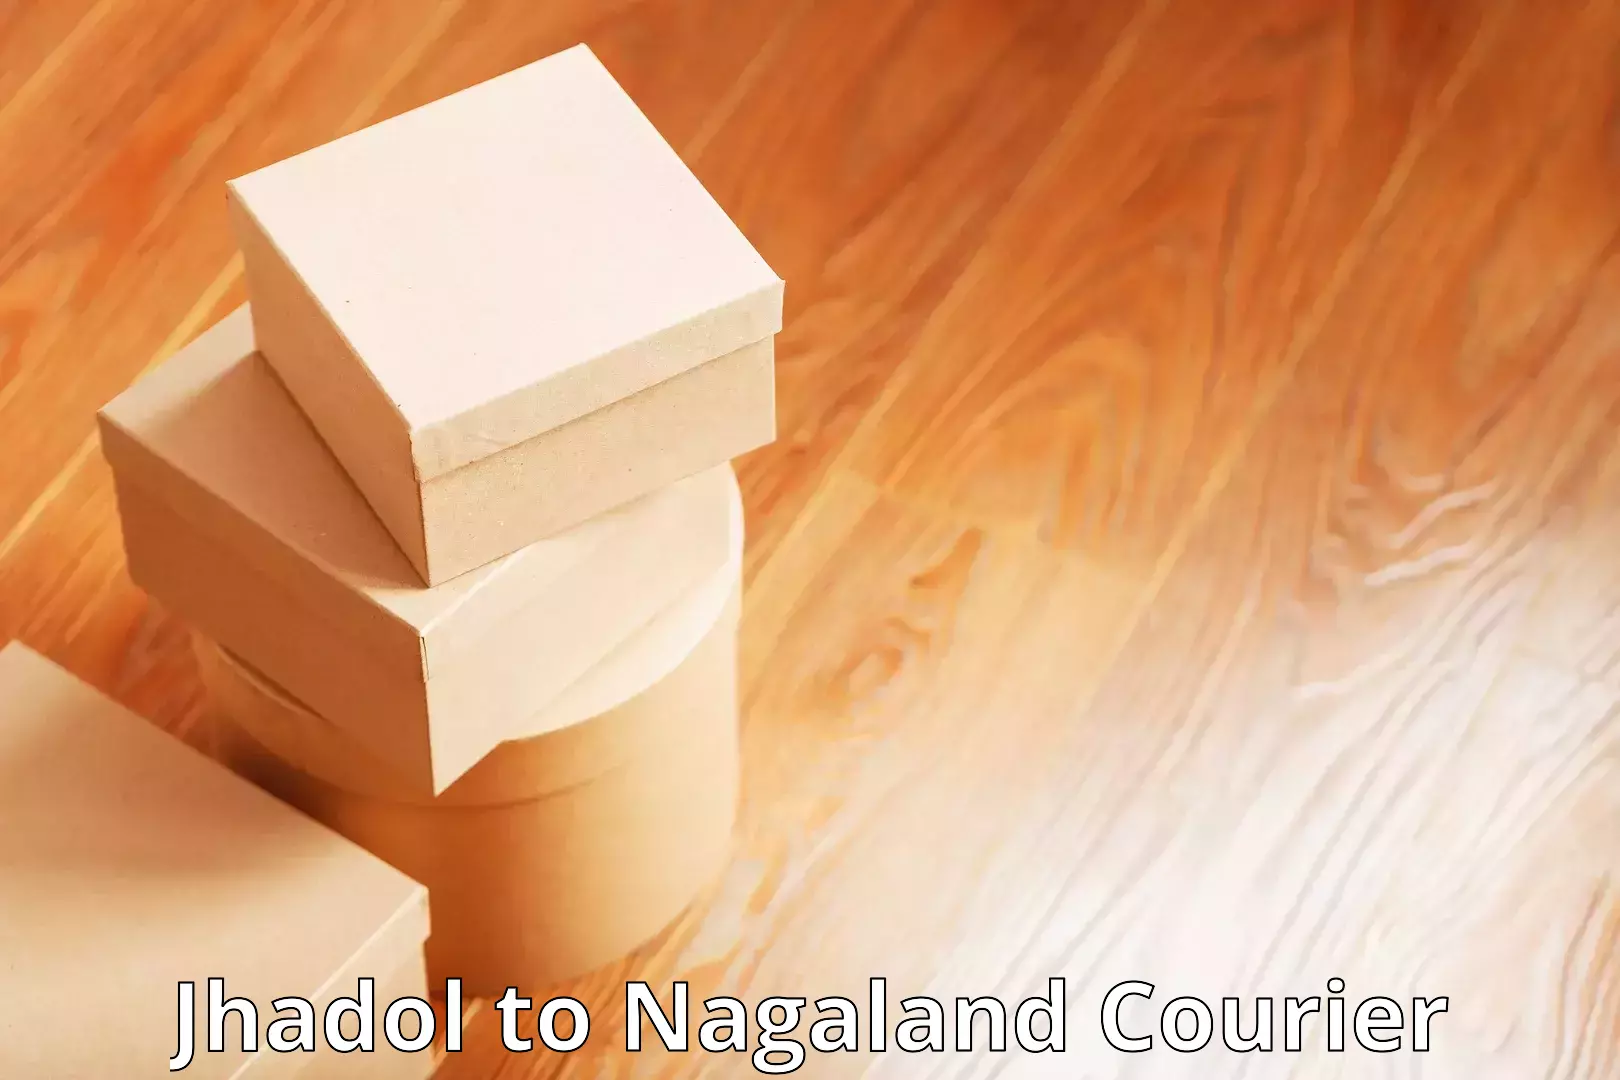 Courier service efficiency Jhadol to Nagaland